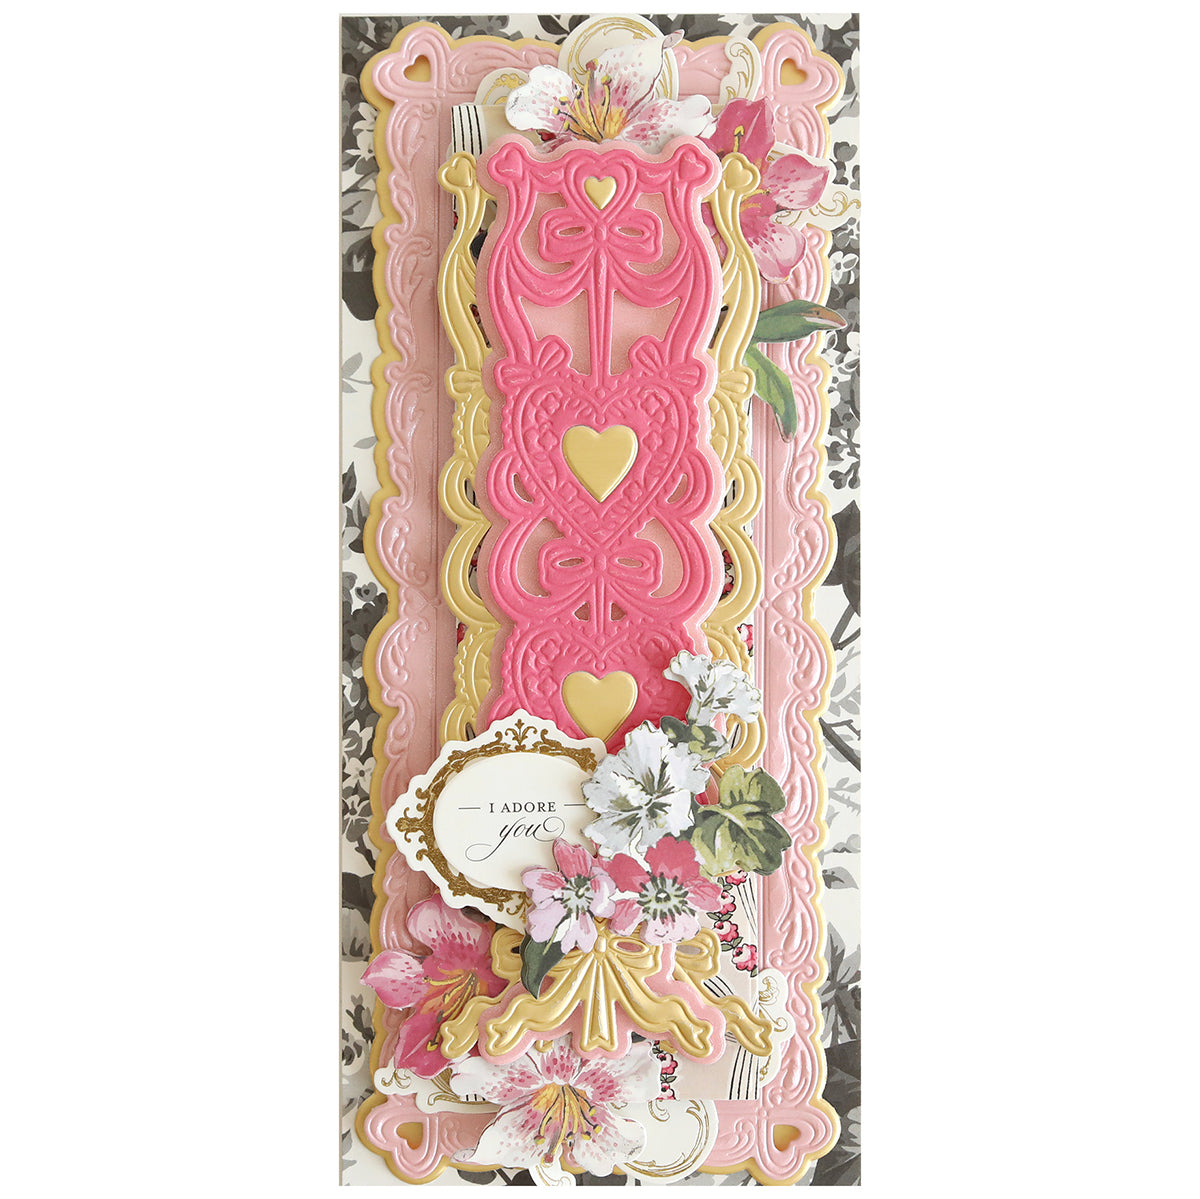 A Valentine's Day card adorned with pink and white flowers, made using Ribbon of Hearts Slimline Dies.